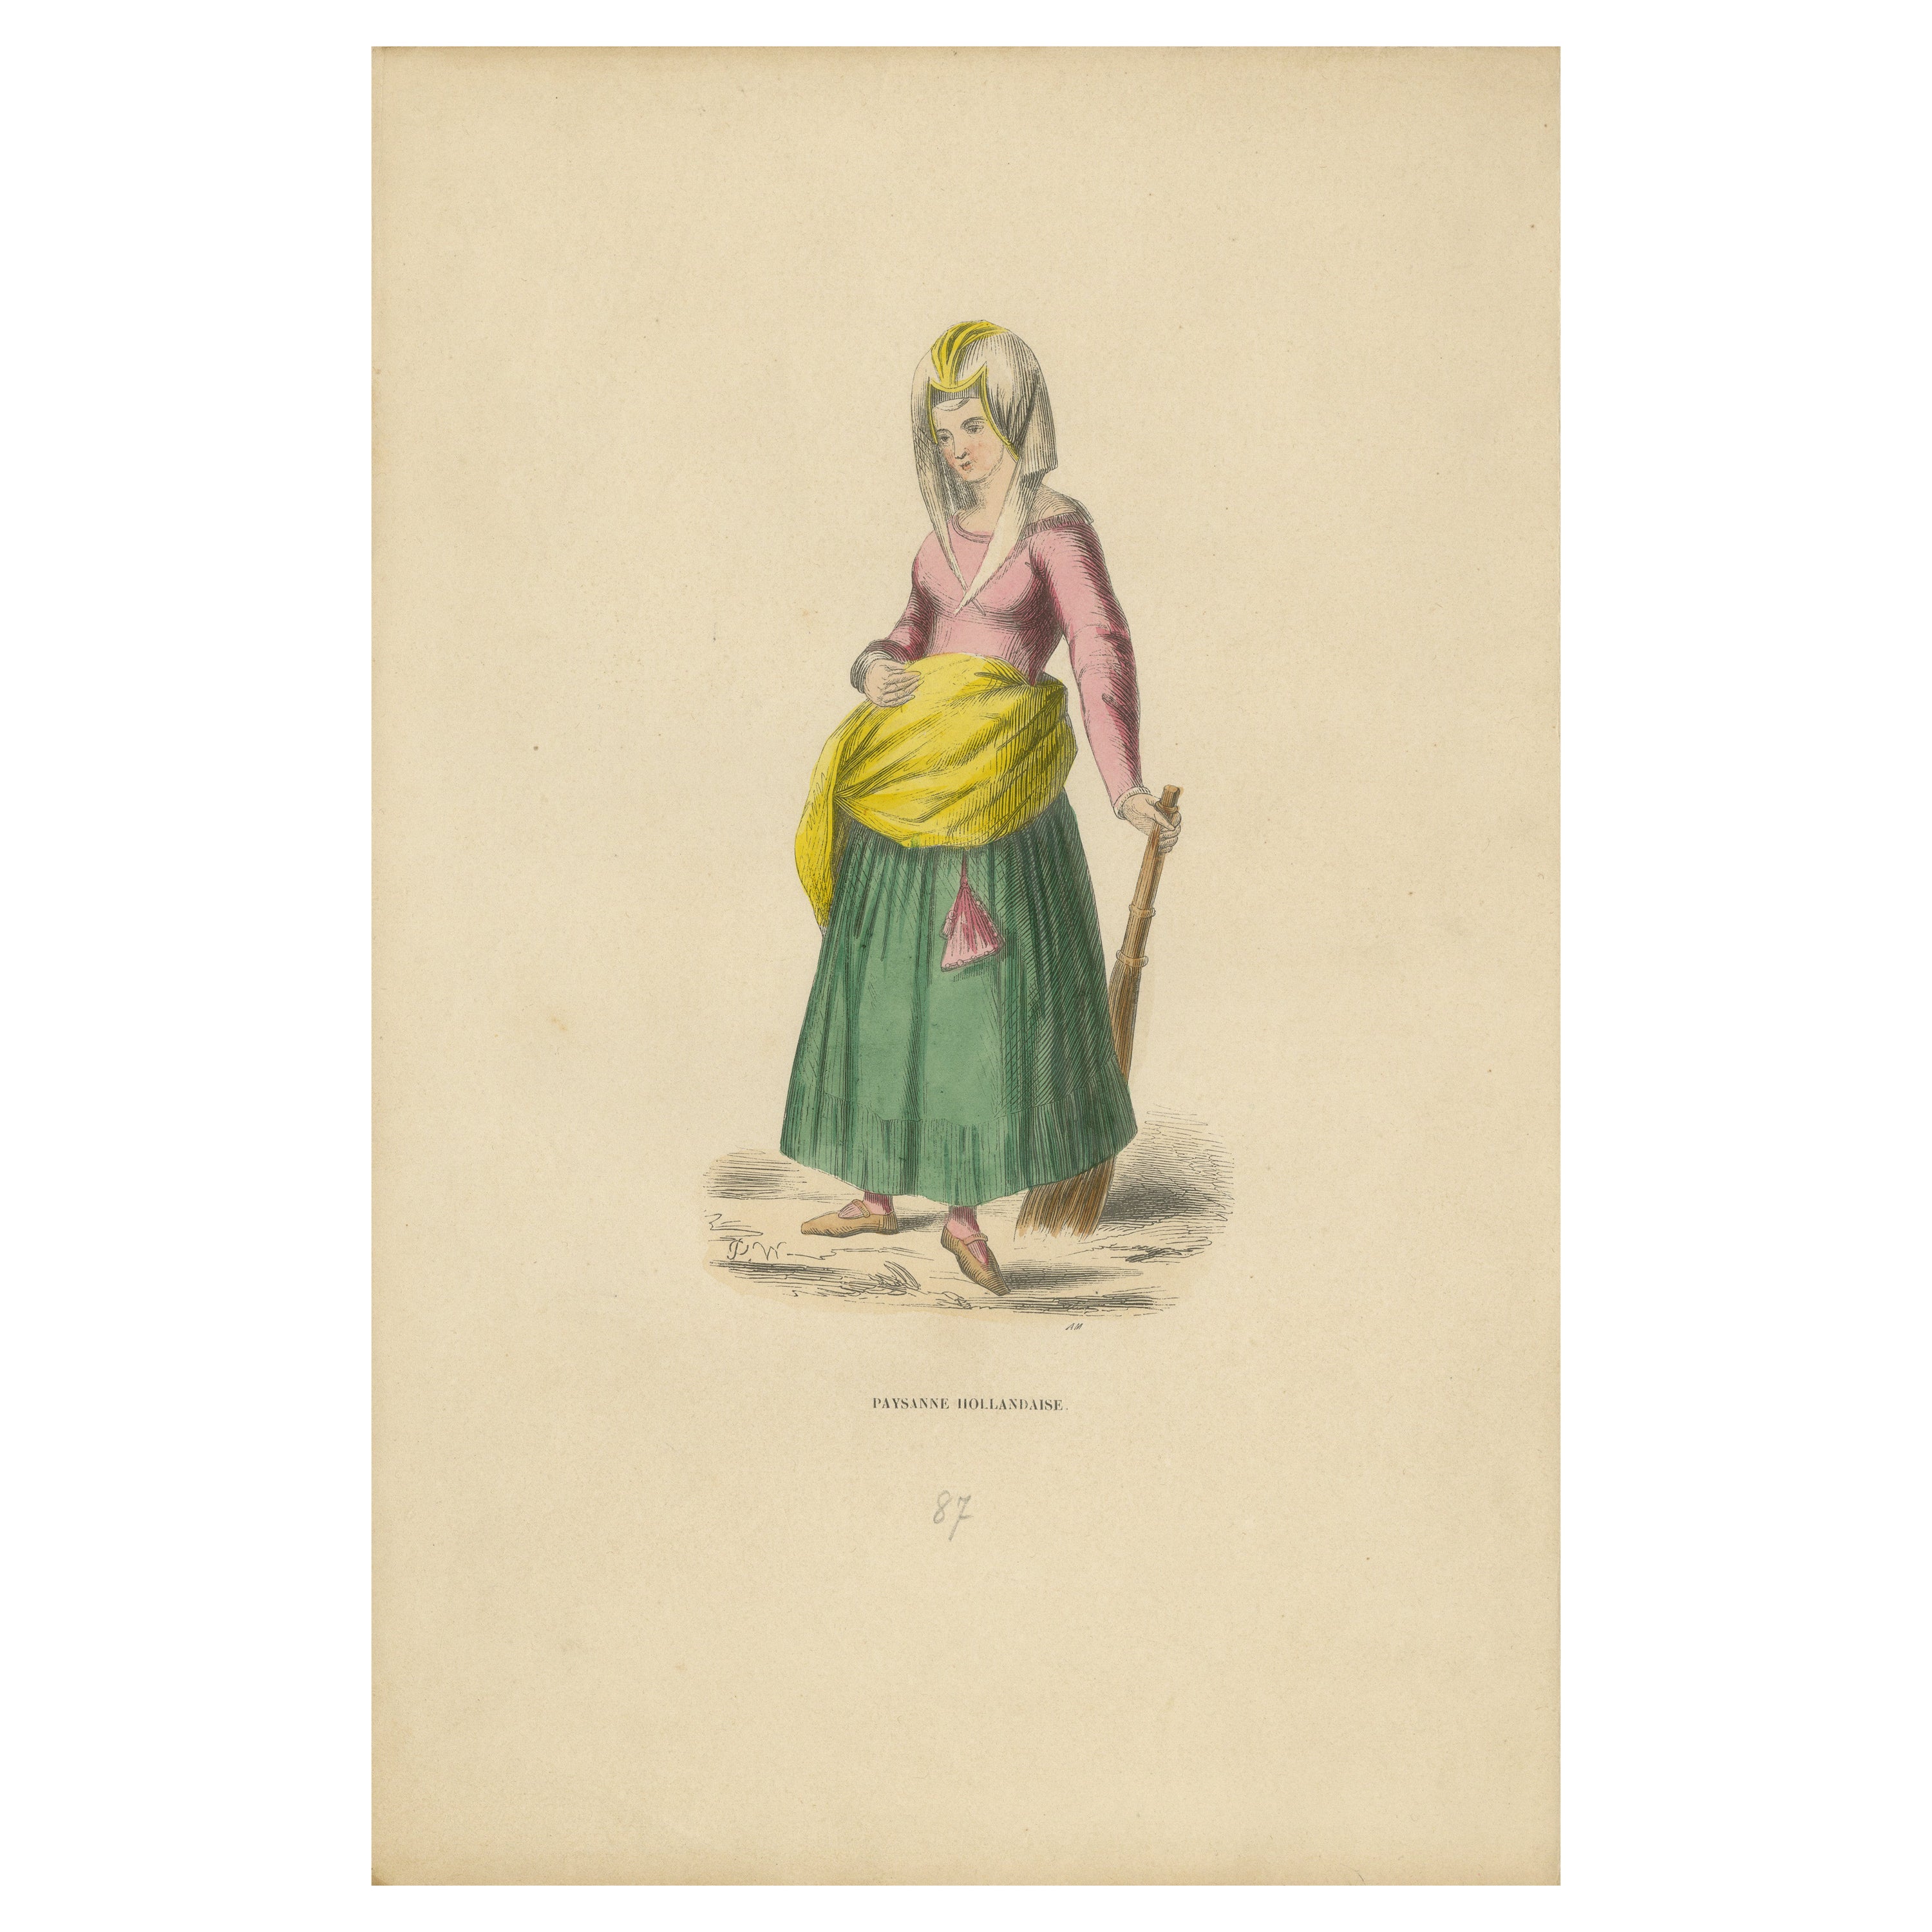 Dutch Peasant Woman of the Middle Ages: A Portrait of Rural Life, 1847